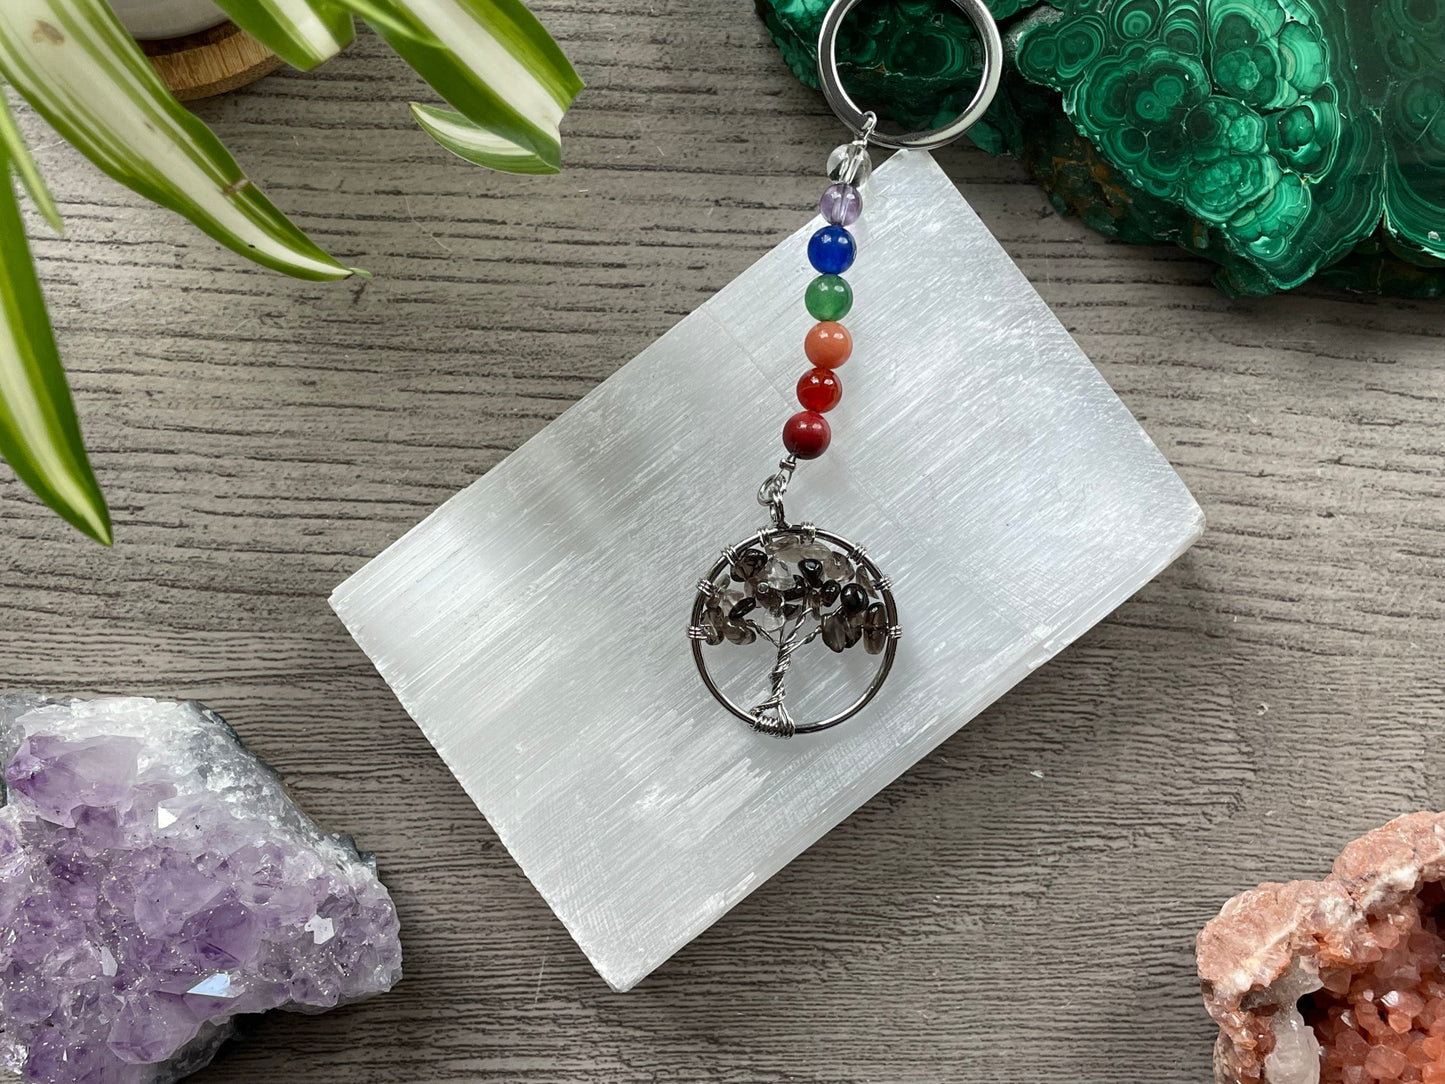 A tree of life with smoky quartz crystals as the leaves on the tree is in the image. The keychain has a number of small multi-coloured beads to represent the chakras on the chain. The keychain sits atop a slab of selenite. Malachite, pink amethyst, and amethyst are nearby.